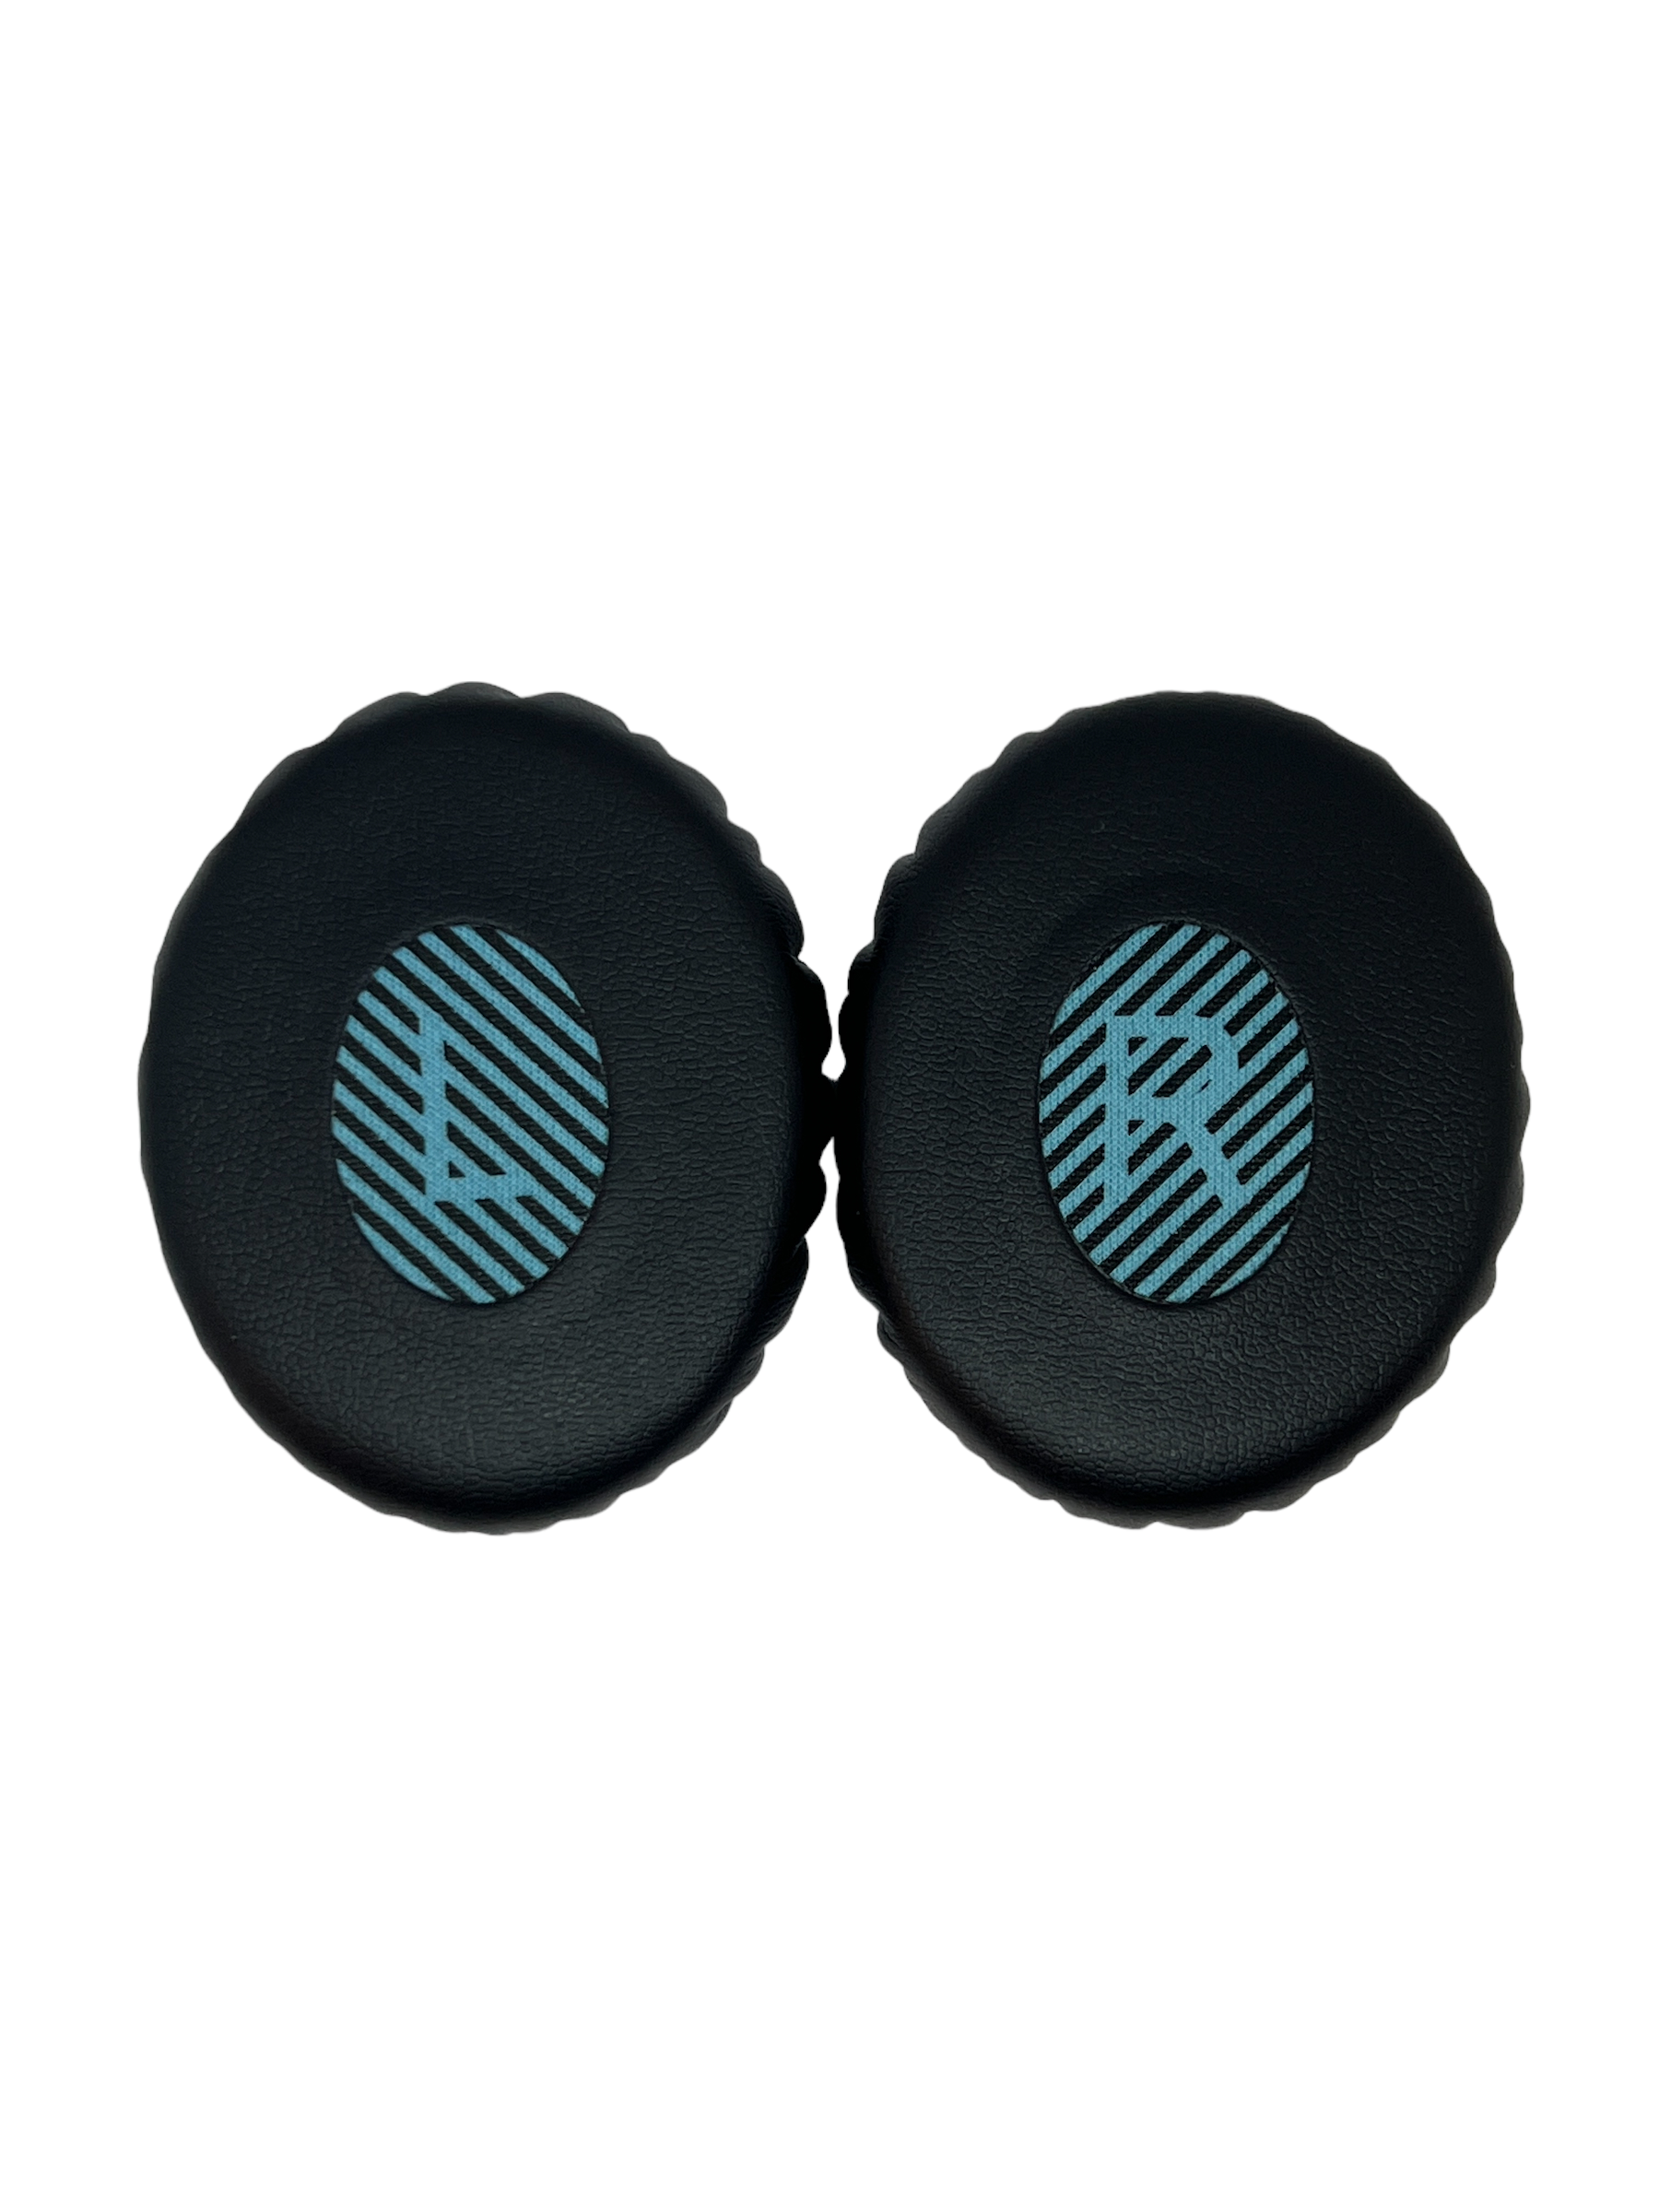 CentralSound Replacement Memory Foam Ear Pad Cushions for Bose SoundTrue and SoundLink On-Ear OE OE2 OE2i Headphones - CentralSound